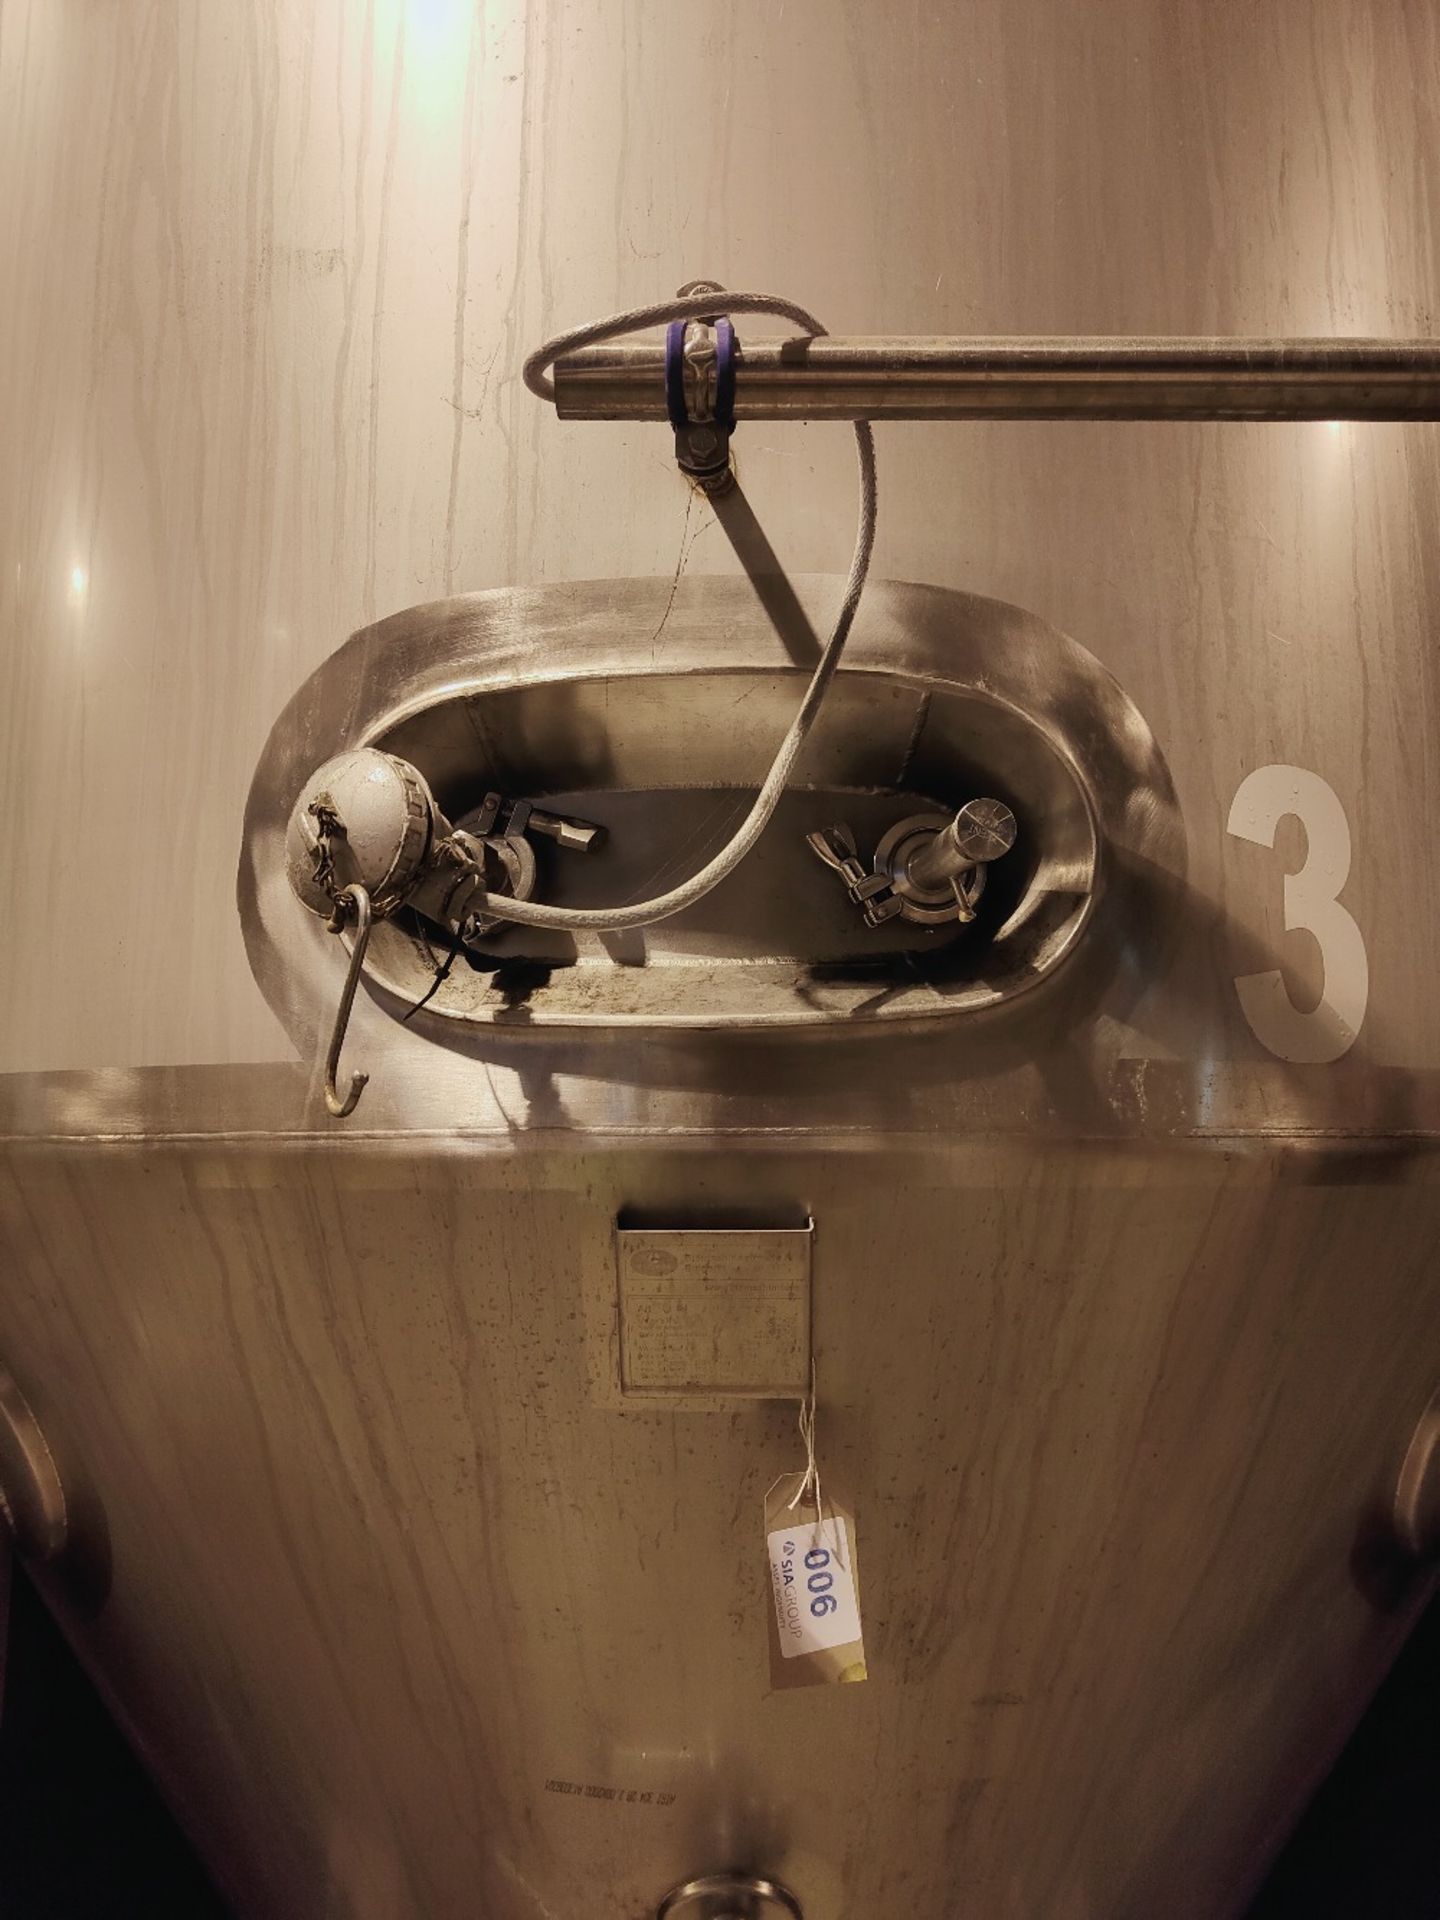 (2014) Biomashinostroene Ad, Bulgaria 6690 Litre Stainless Steel Fermentation Tank With Conical Base - Image 2 of 4